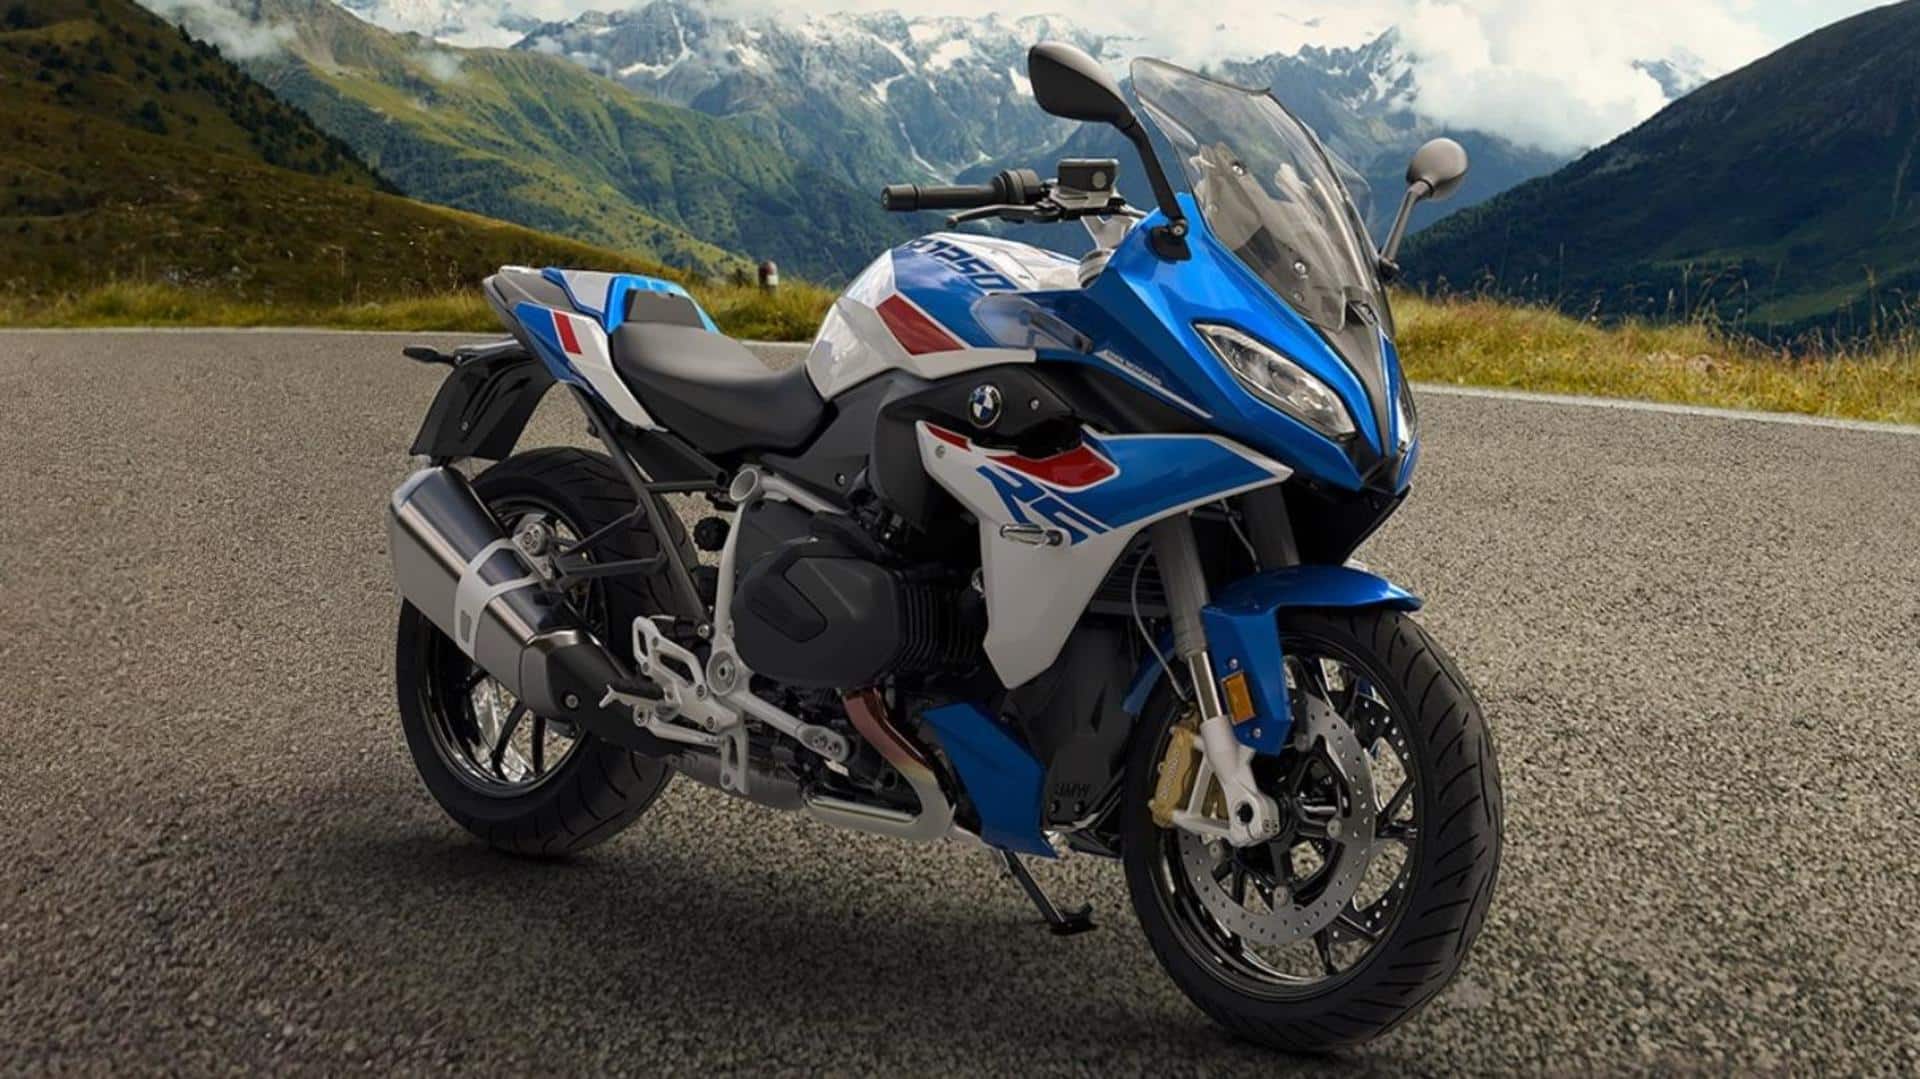 2023 BMW R 1250 RS goes official with new features